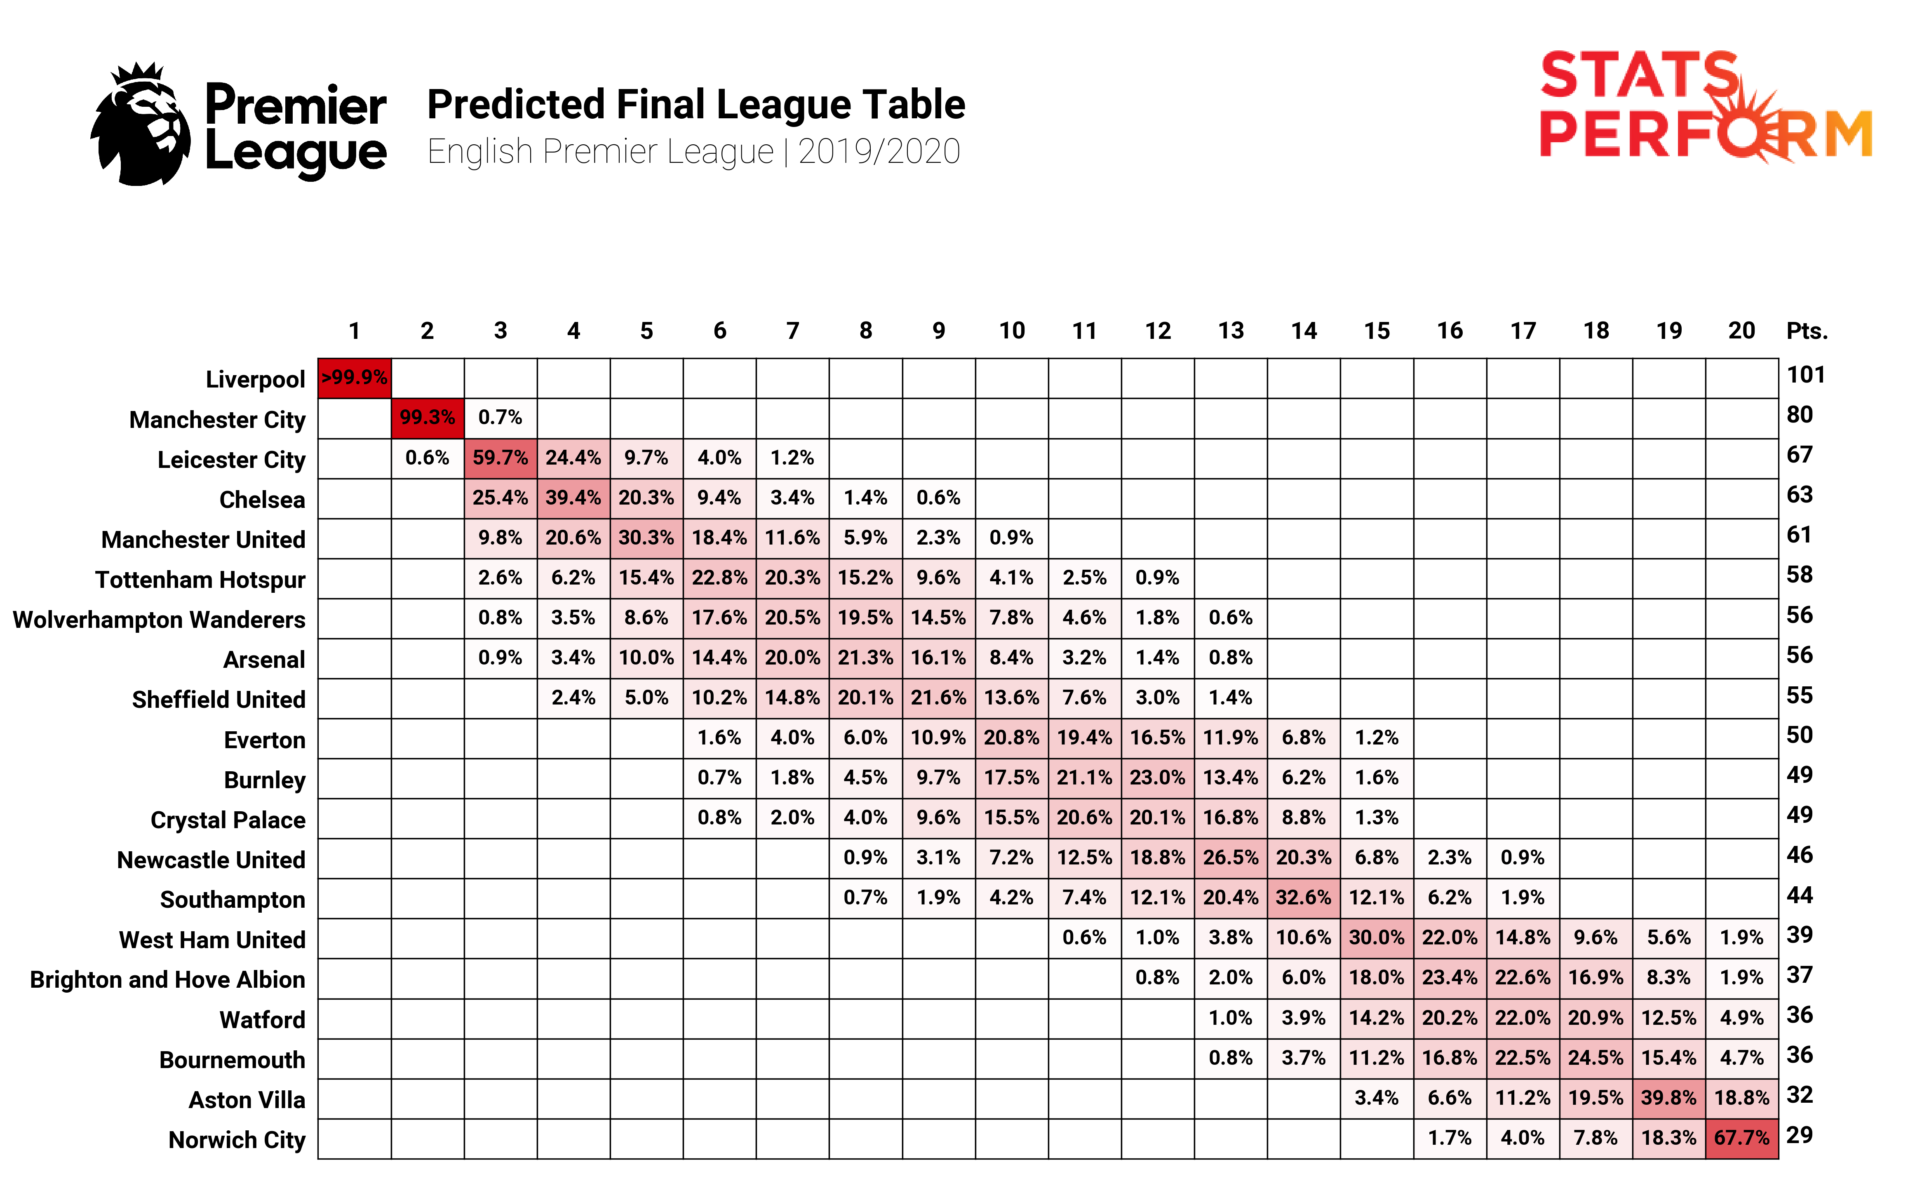 , Liverpool have 99.9% chance of winning Premier League and Norwich doomed to be relegated, simulation predicts